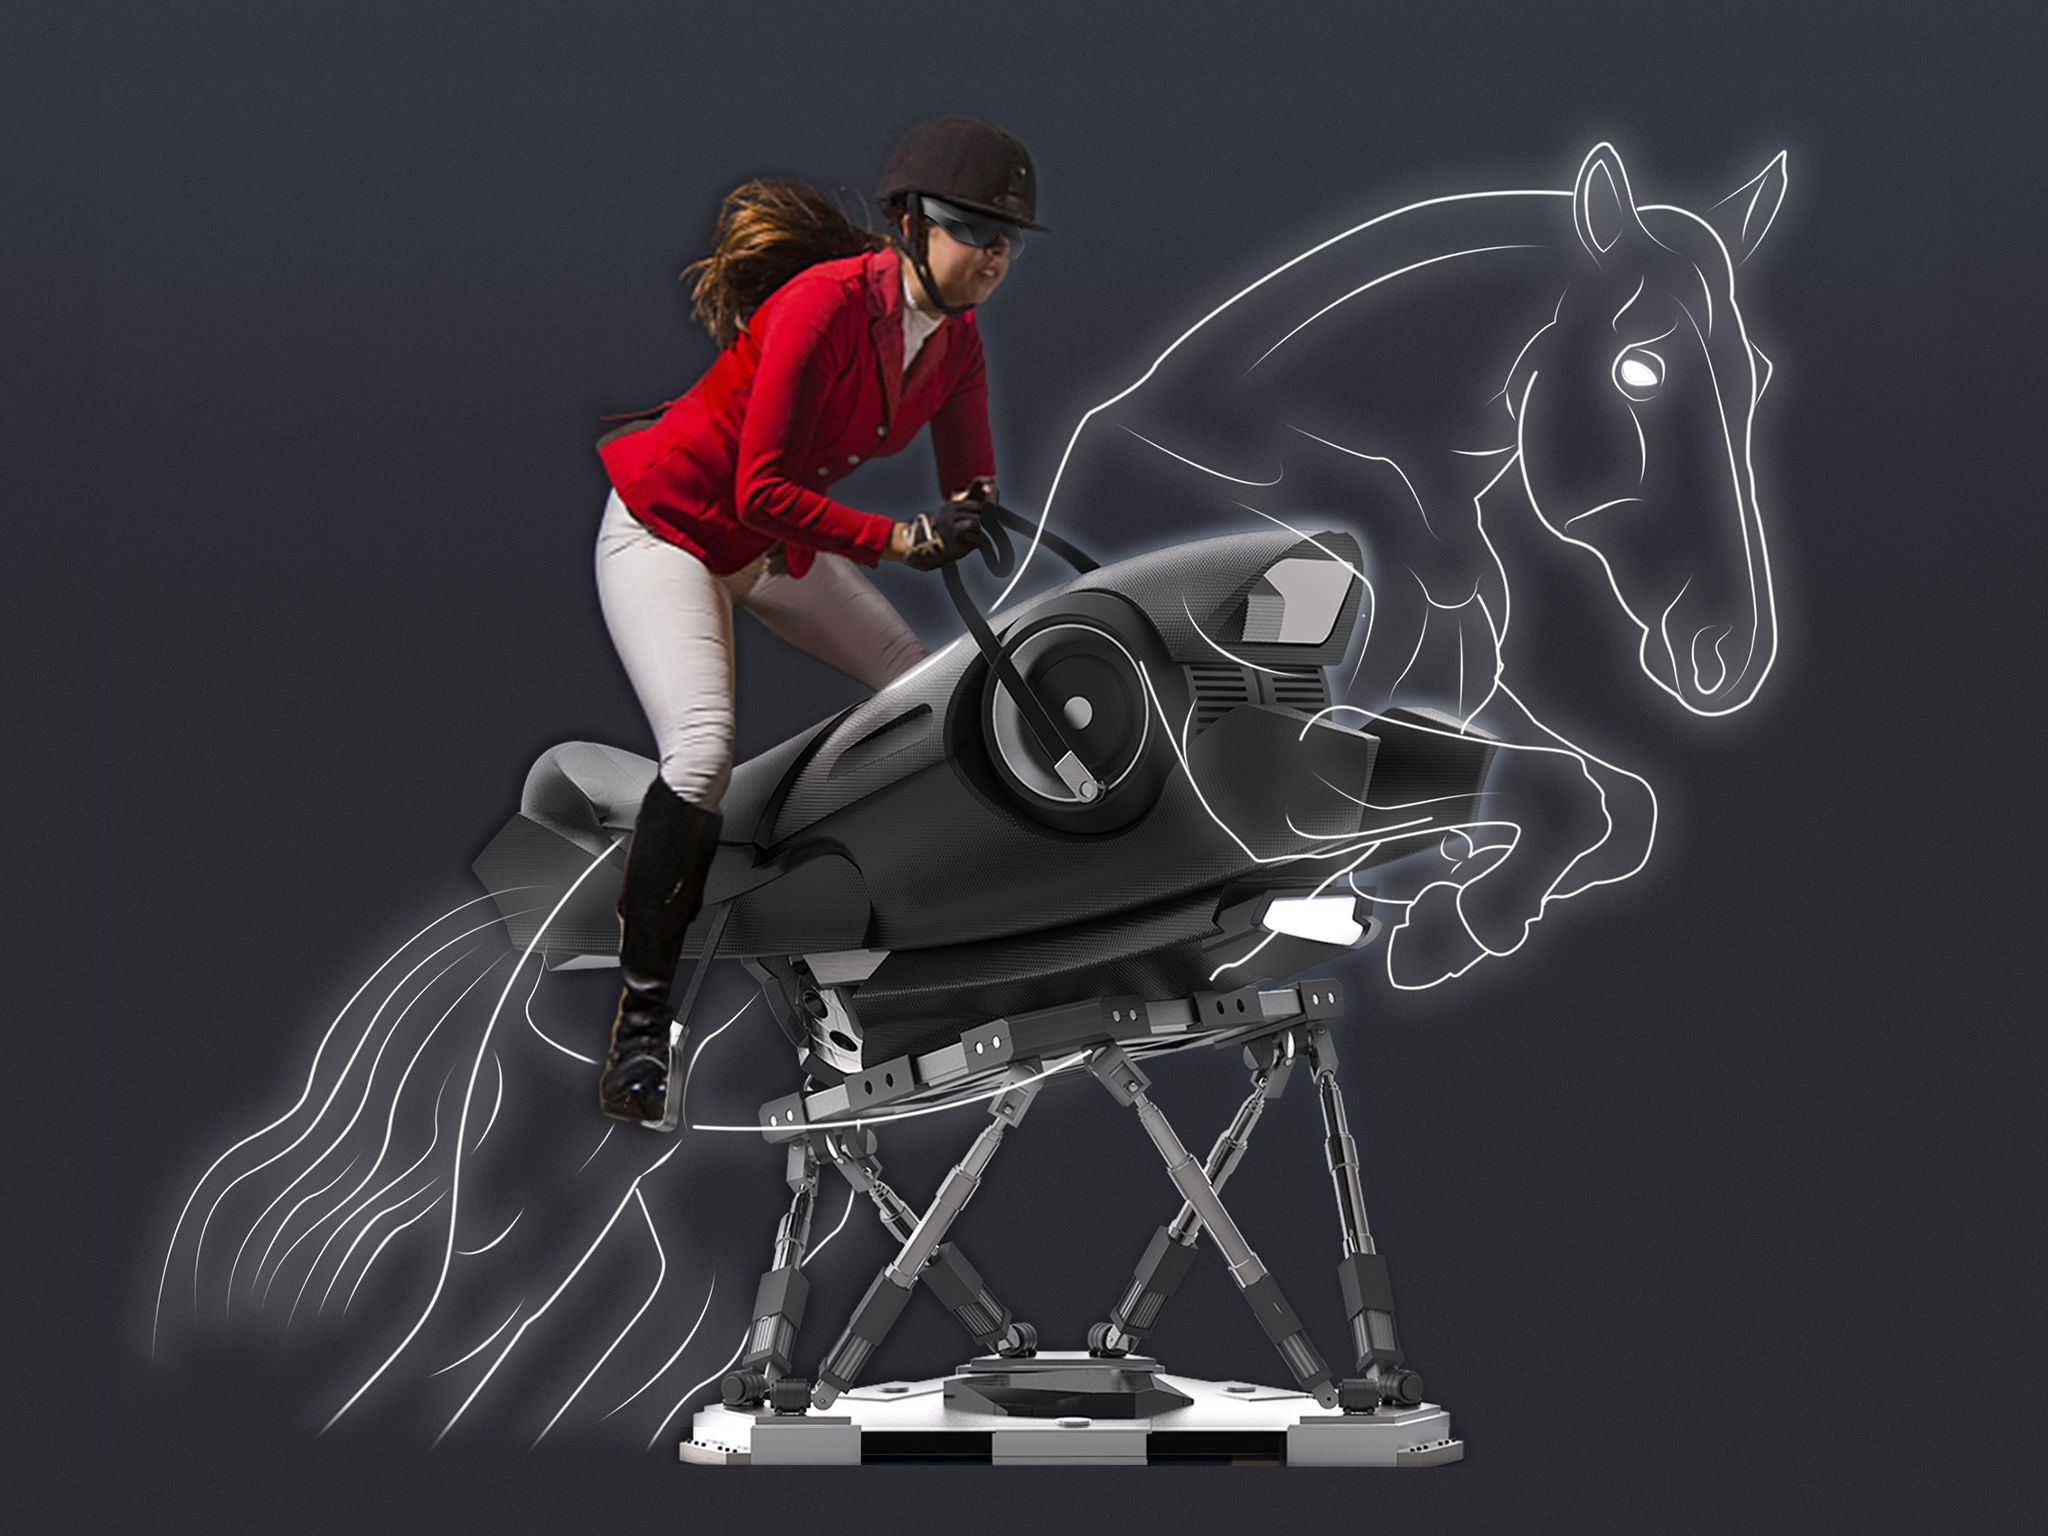 Vr Horse Riding Training If World Design Guide